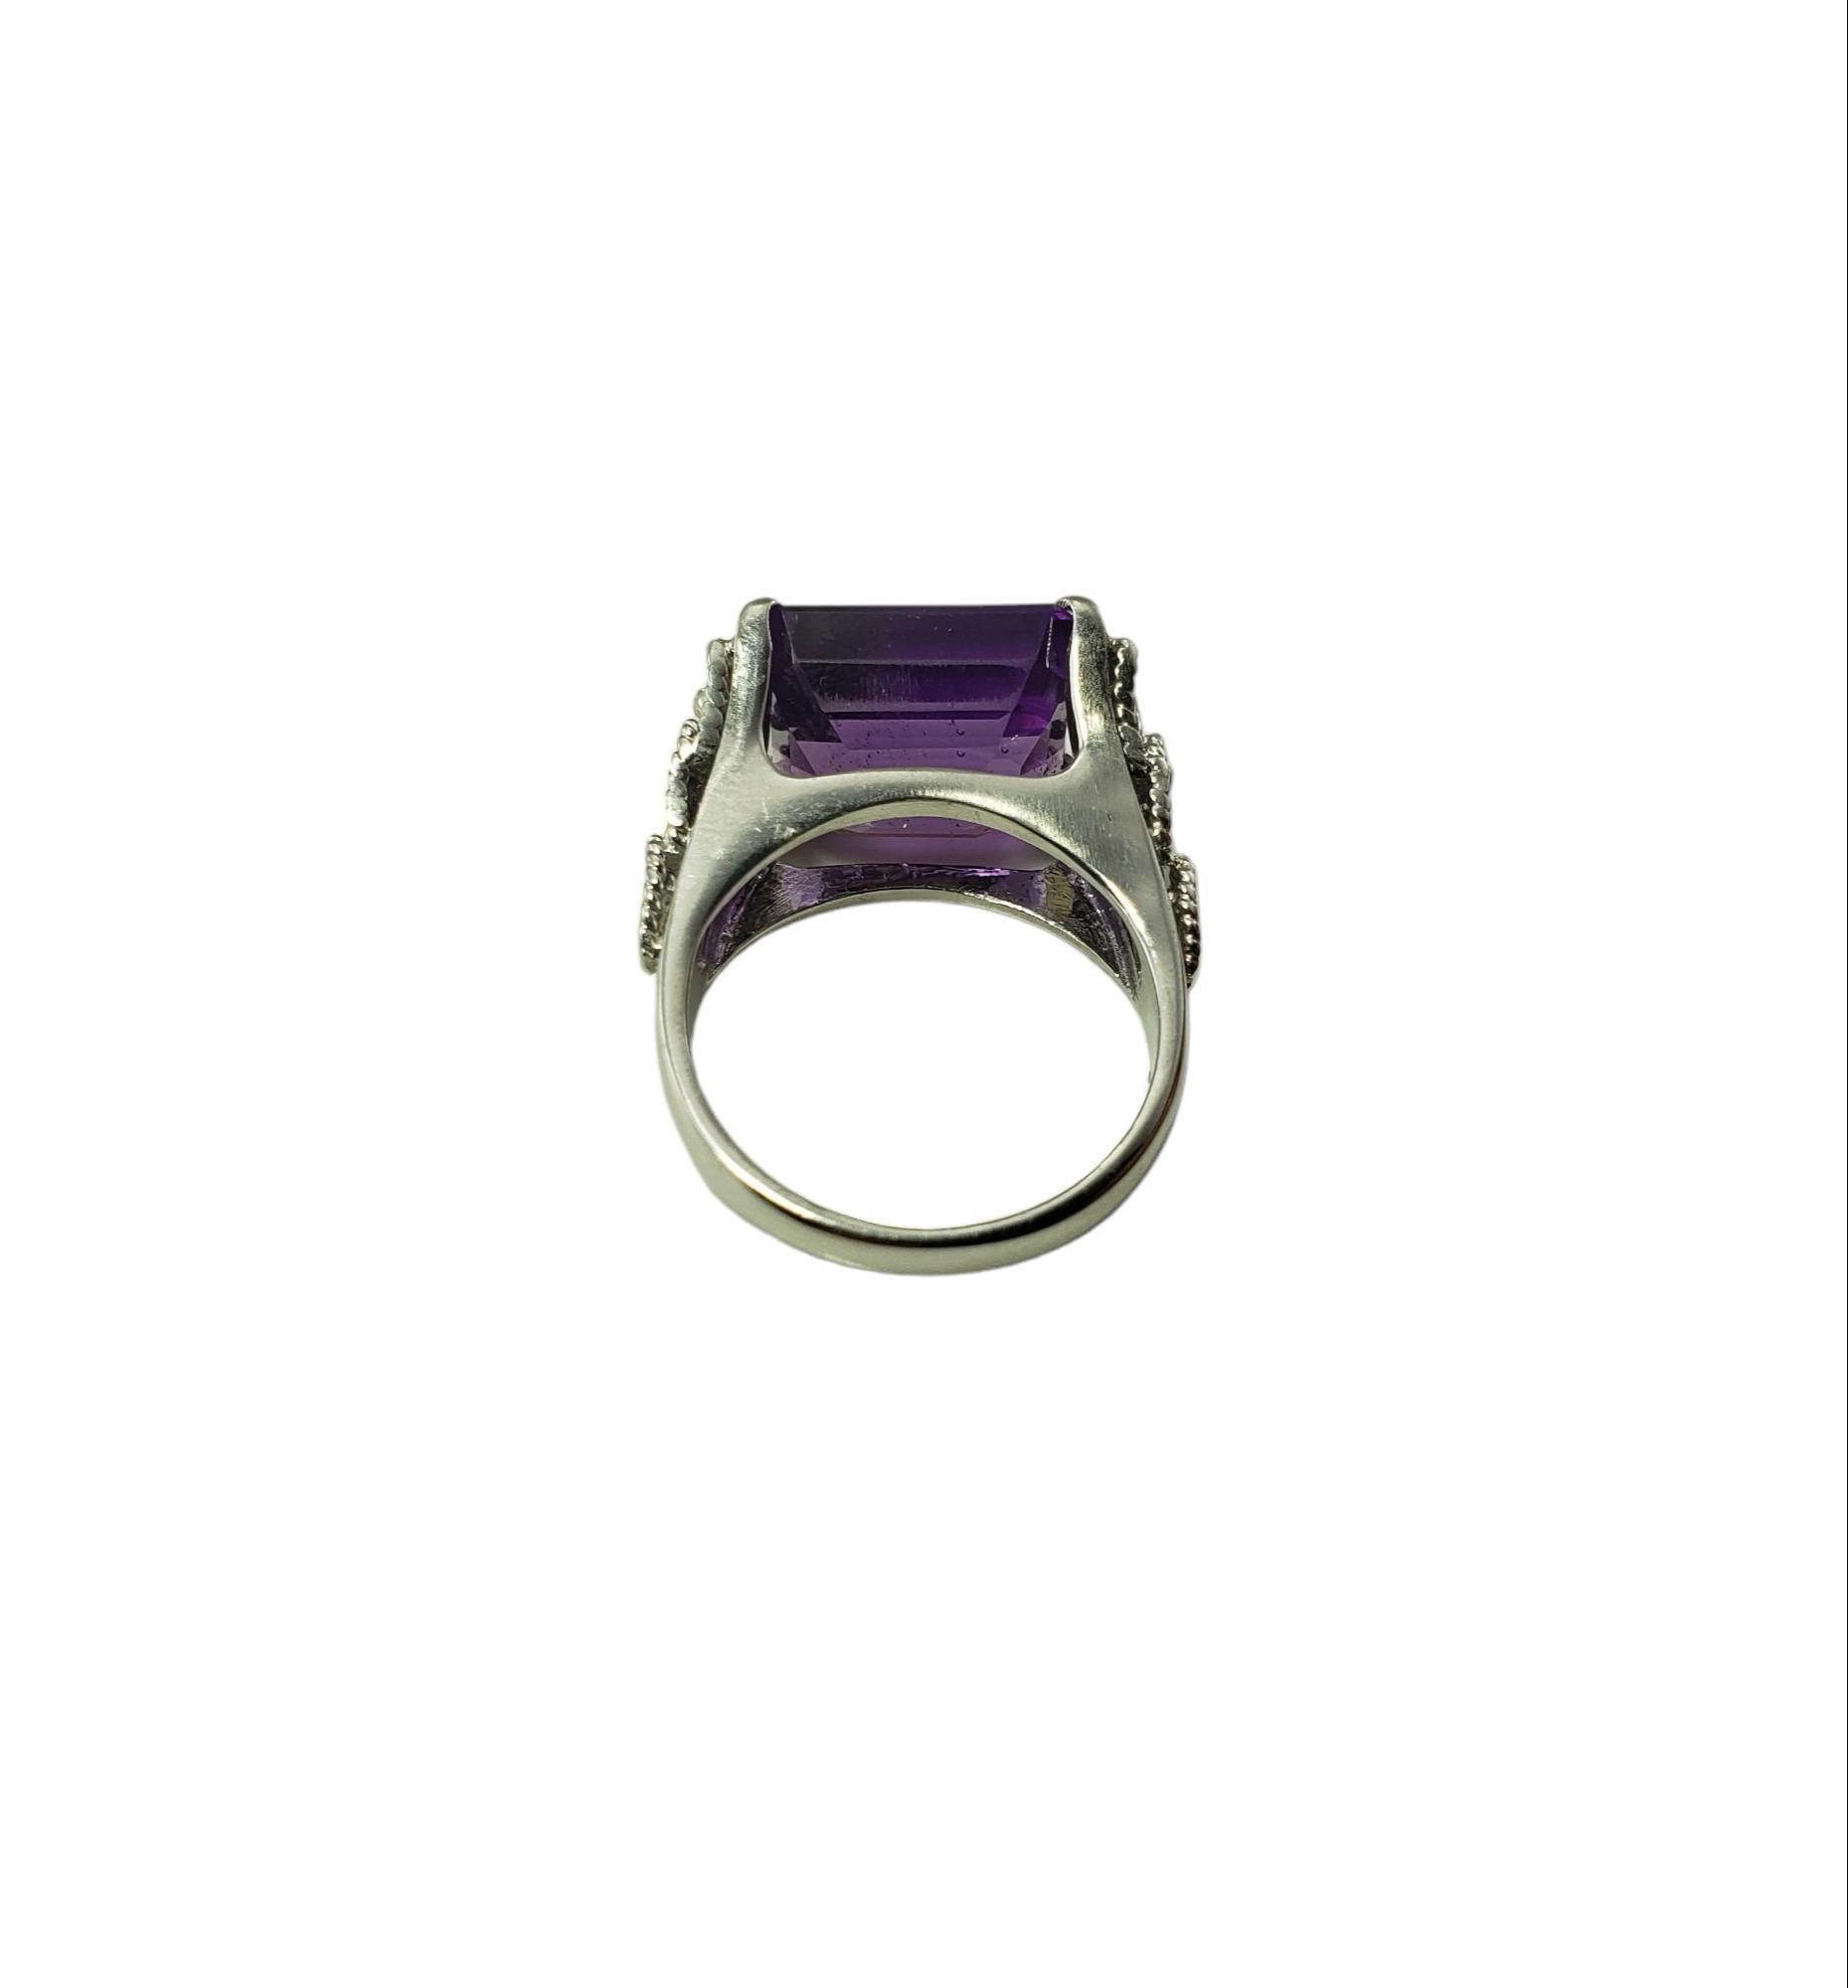 14K White Gold Amethyst Ring Size 6.75 #15459 In Good Condition For Sale In Washington Depot, CT